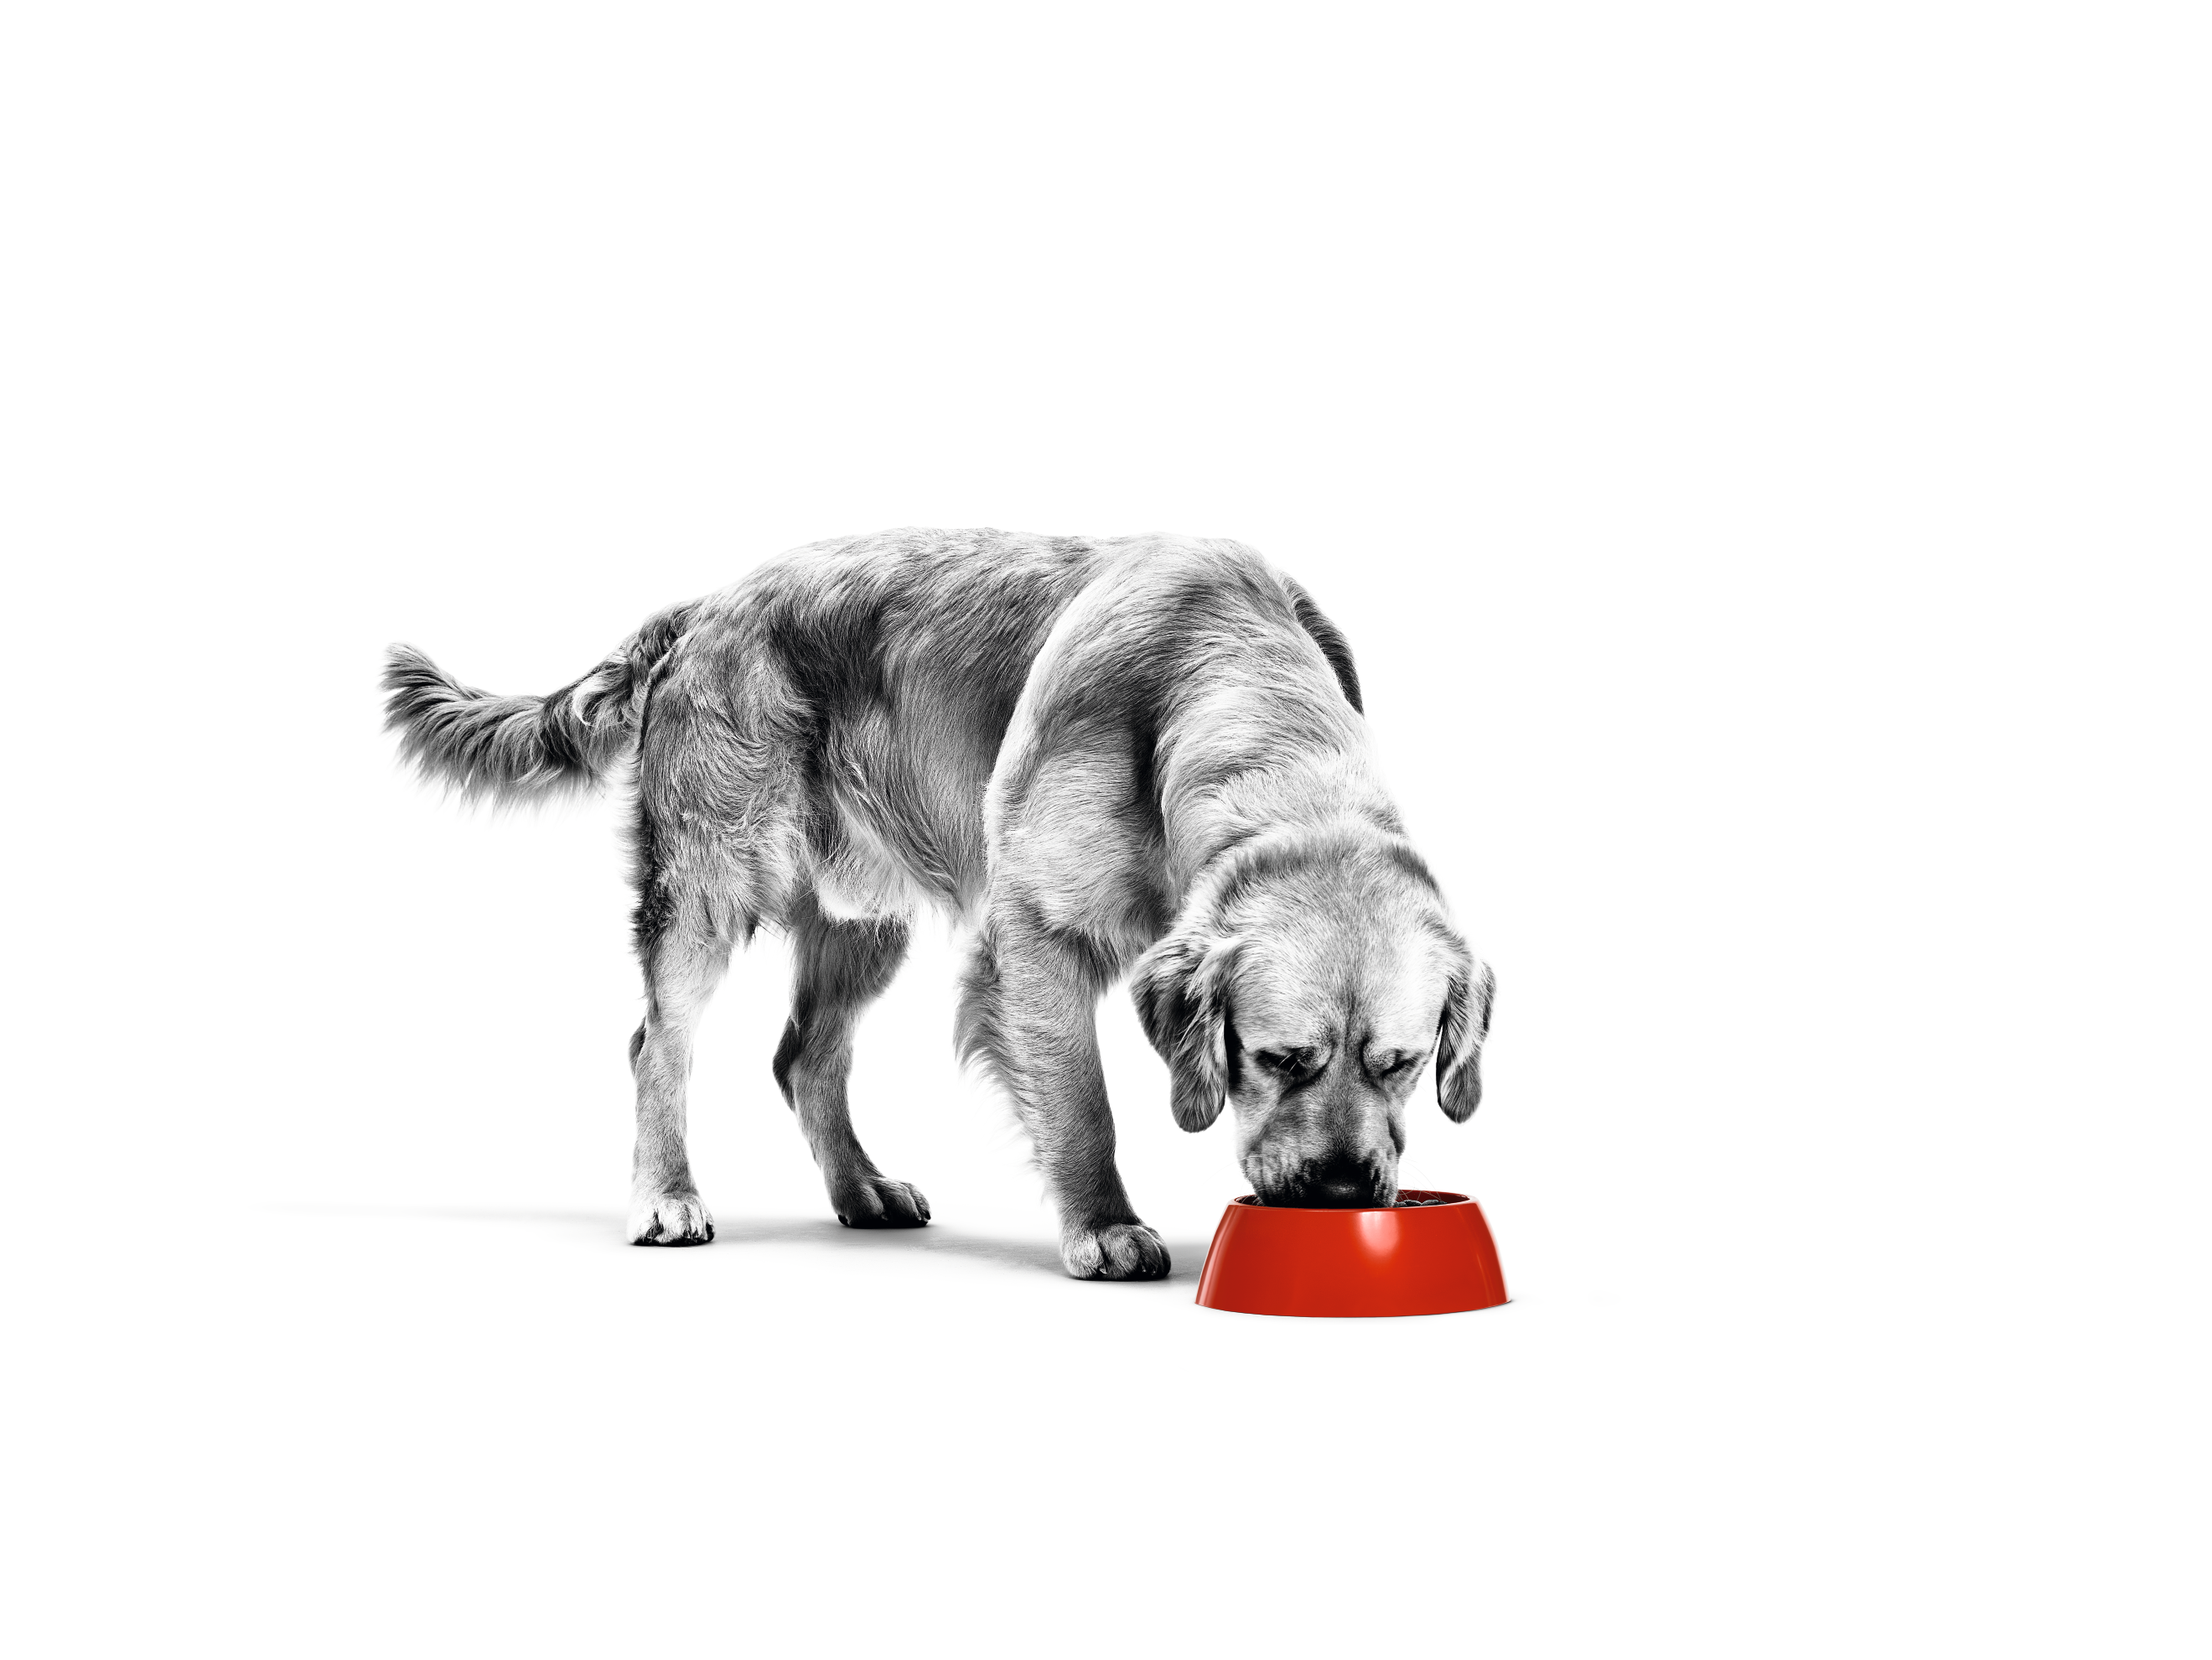 Golden Retriever adult in black and white eating from a red bowl